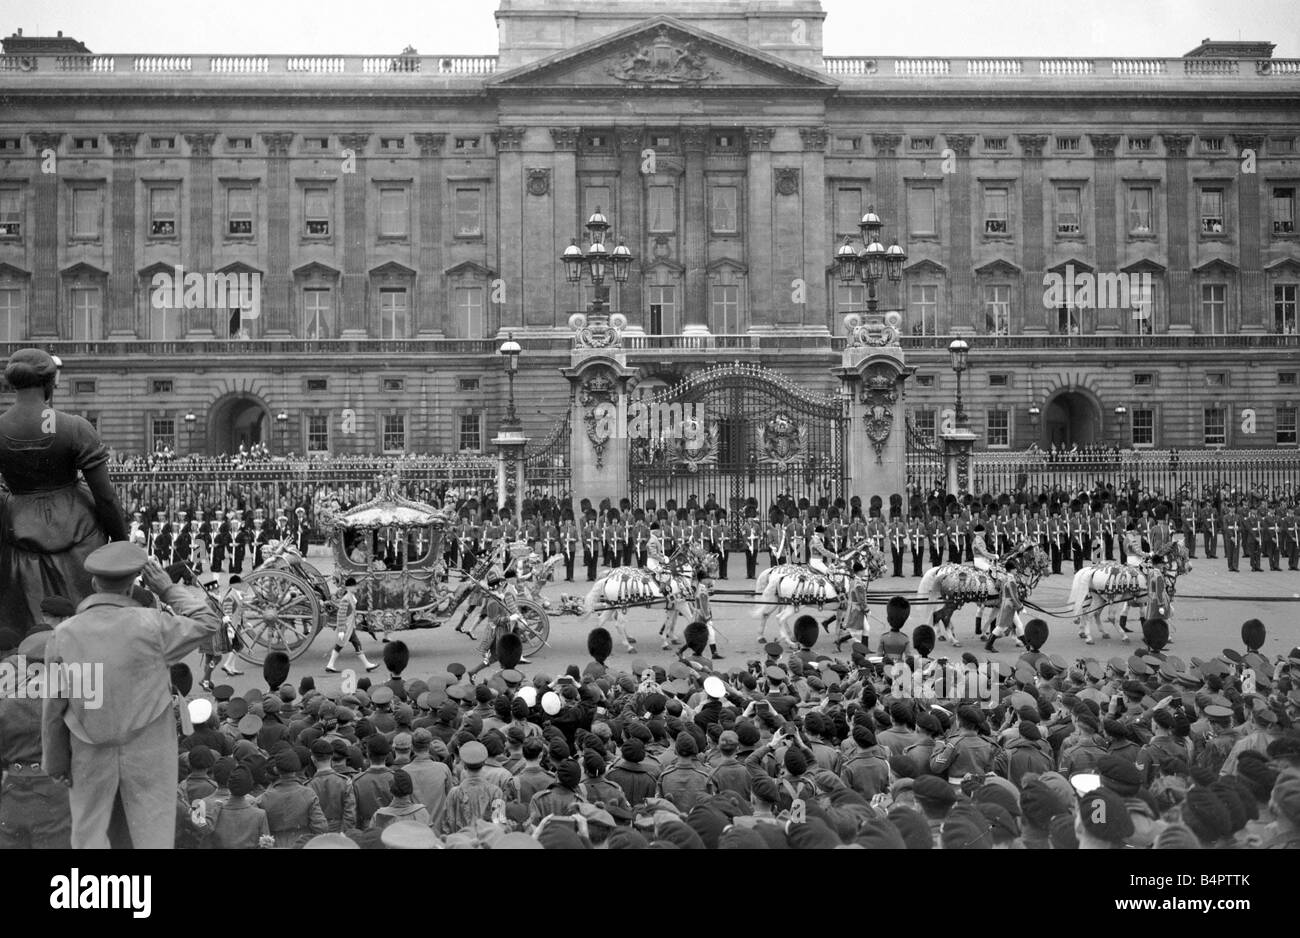 Queen Elizabeth Coronation II June 1953 The royal coach carrying Queen Elizabeth II to her Coronation passes Buckingham Palace during her journey to Westminster Abbey The Queen was carried through the streets of the capital in a majestic golden coach pulled by eight beautiful grey horses Heads of state foreign royalty and the leaders of every Commonwealth nation took part in the procession carried in their official coaches to the Abbey Stock Photo